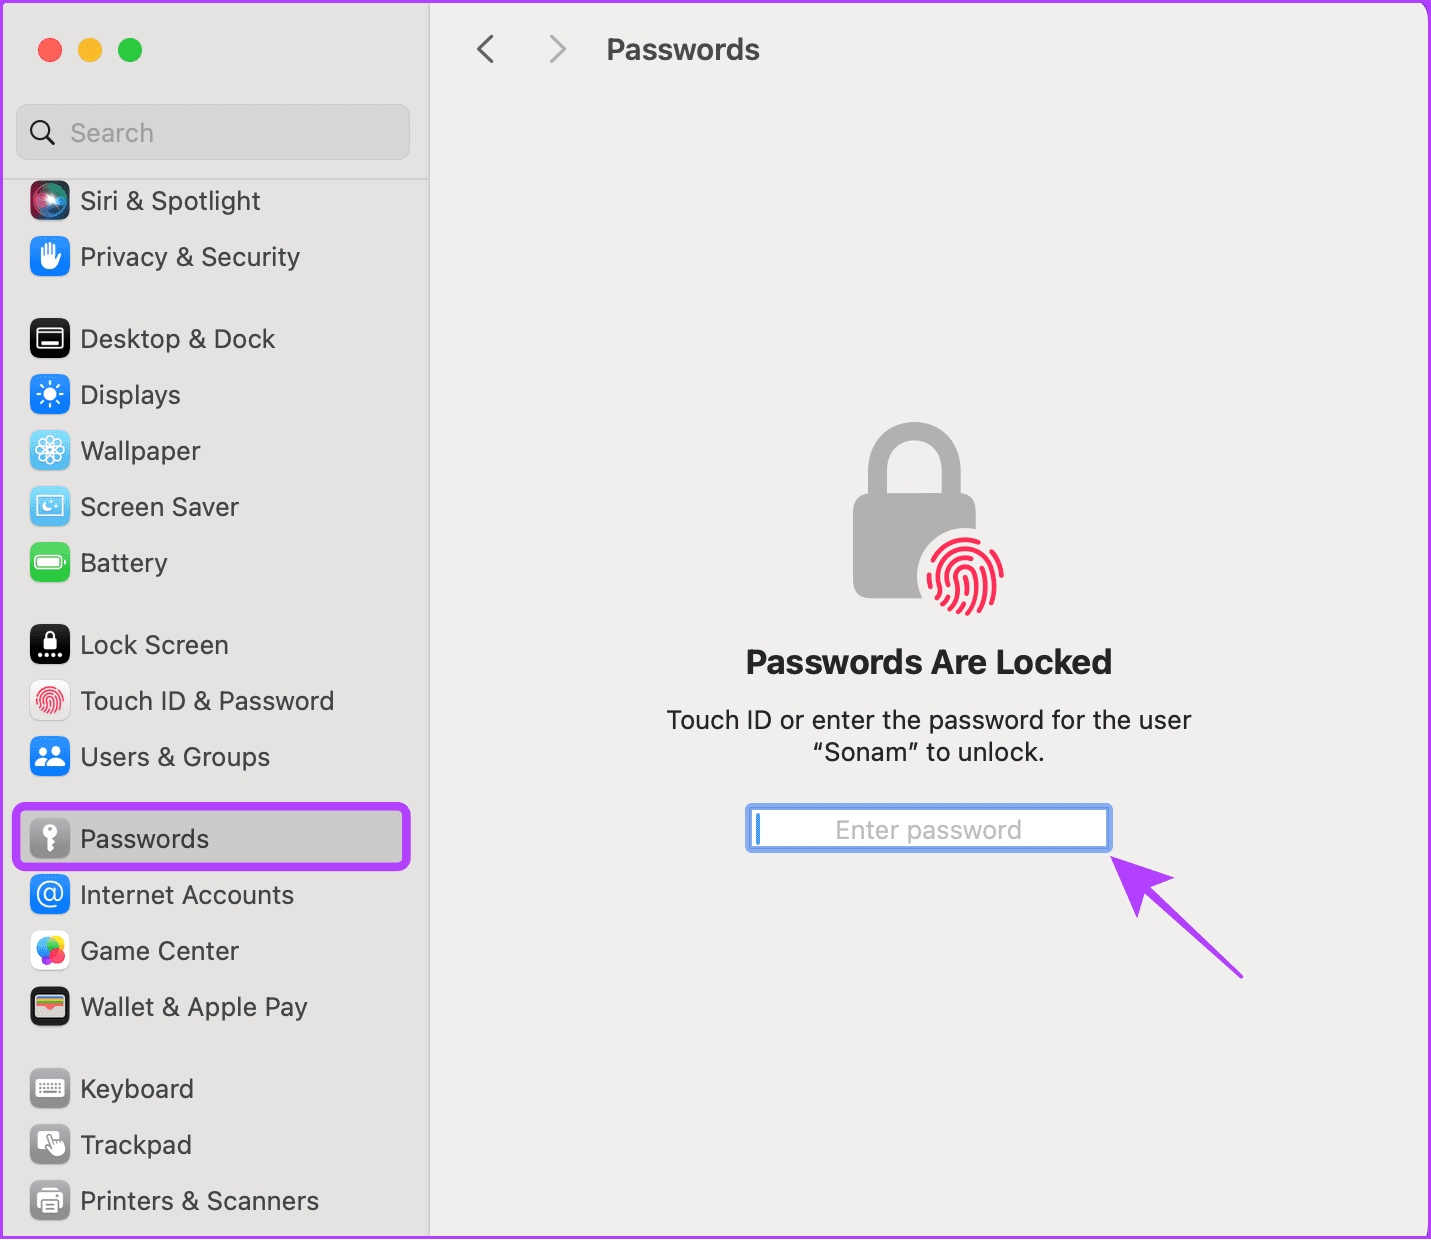 choose Passwords and verify your device